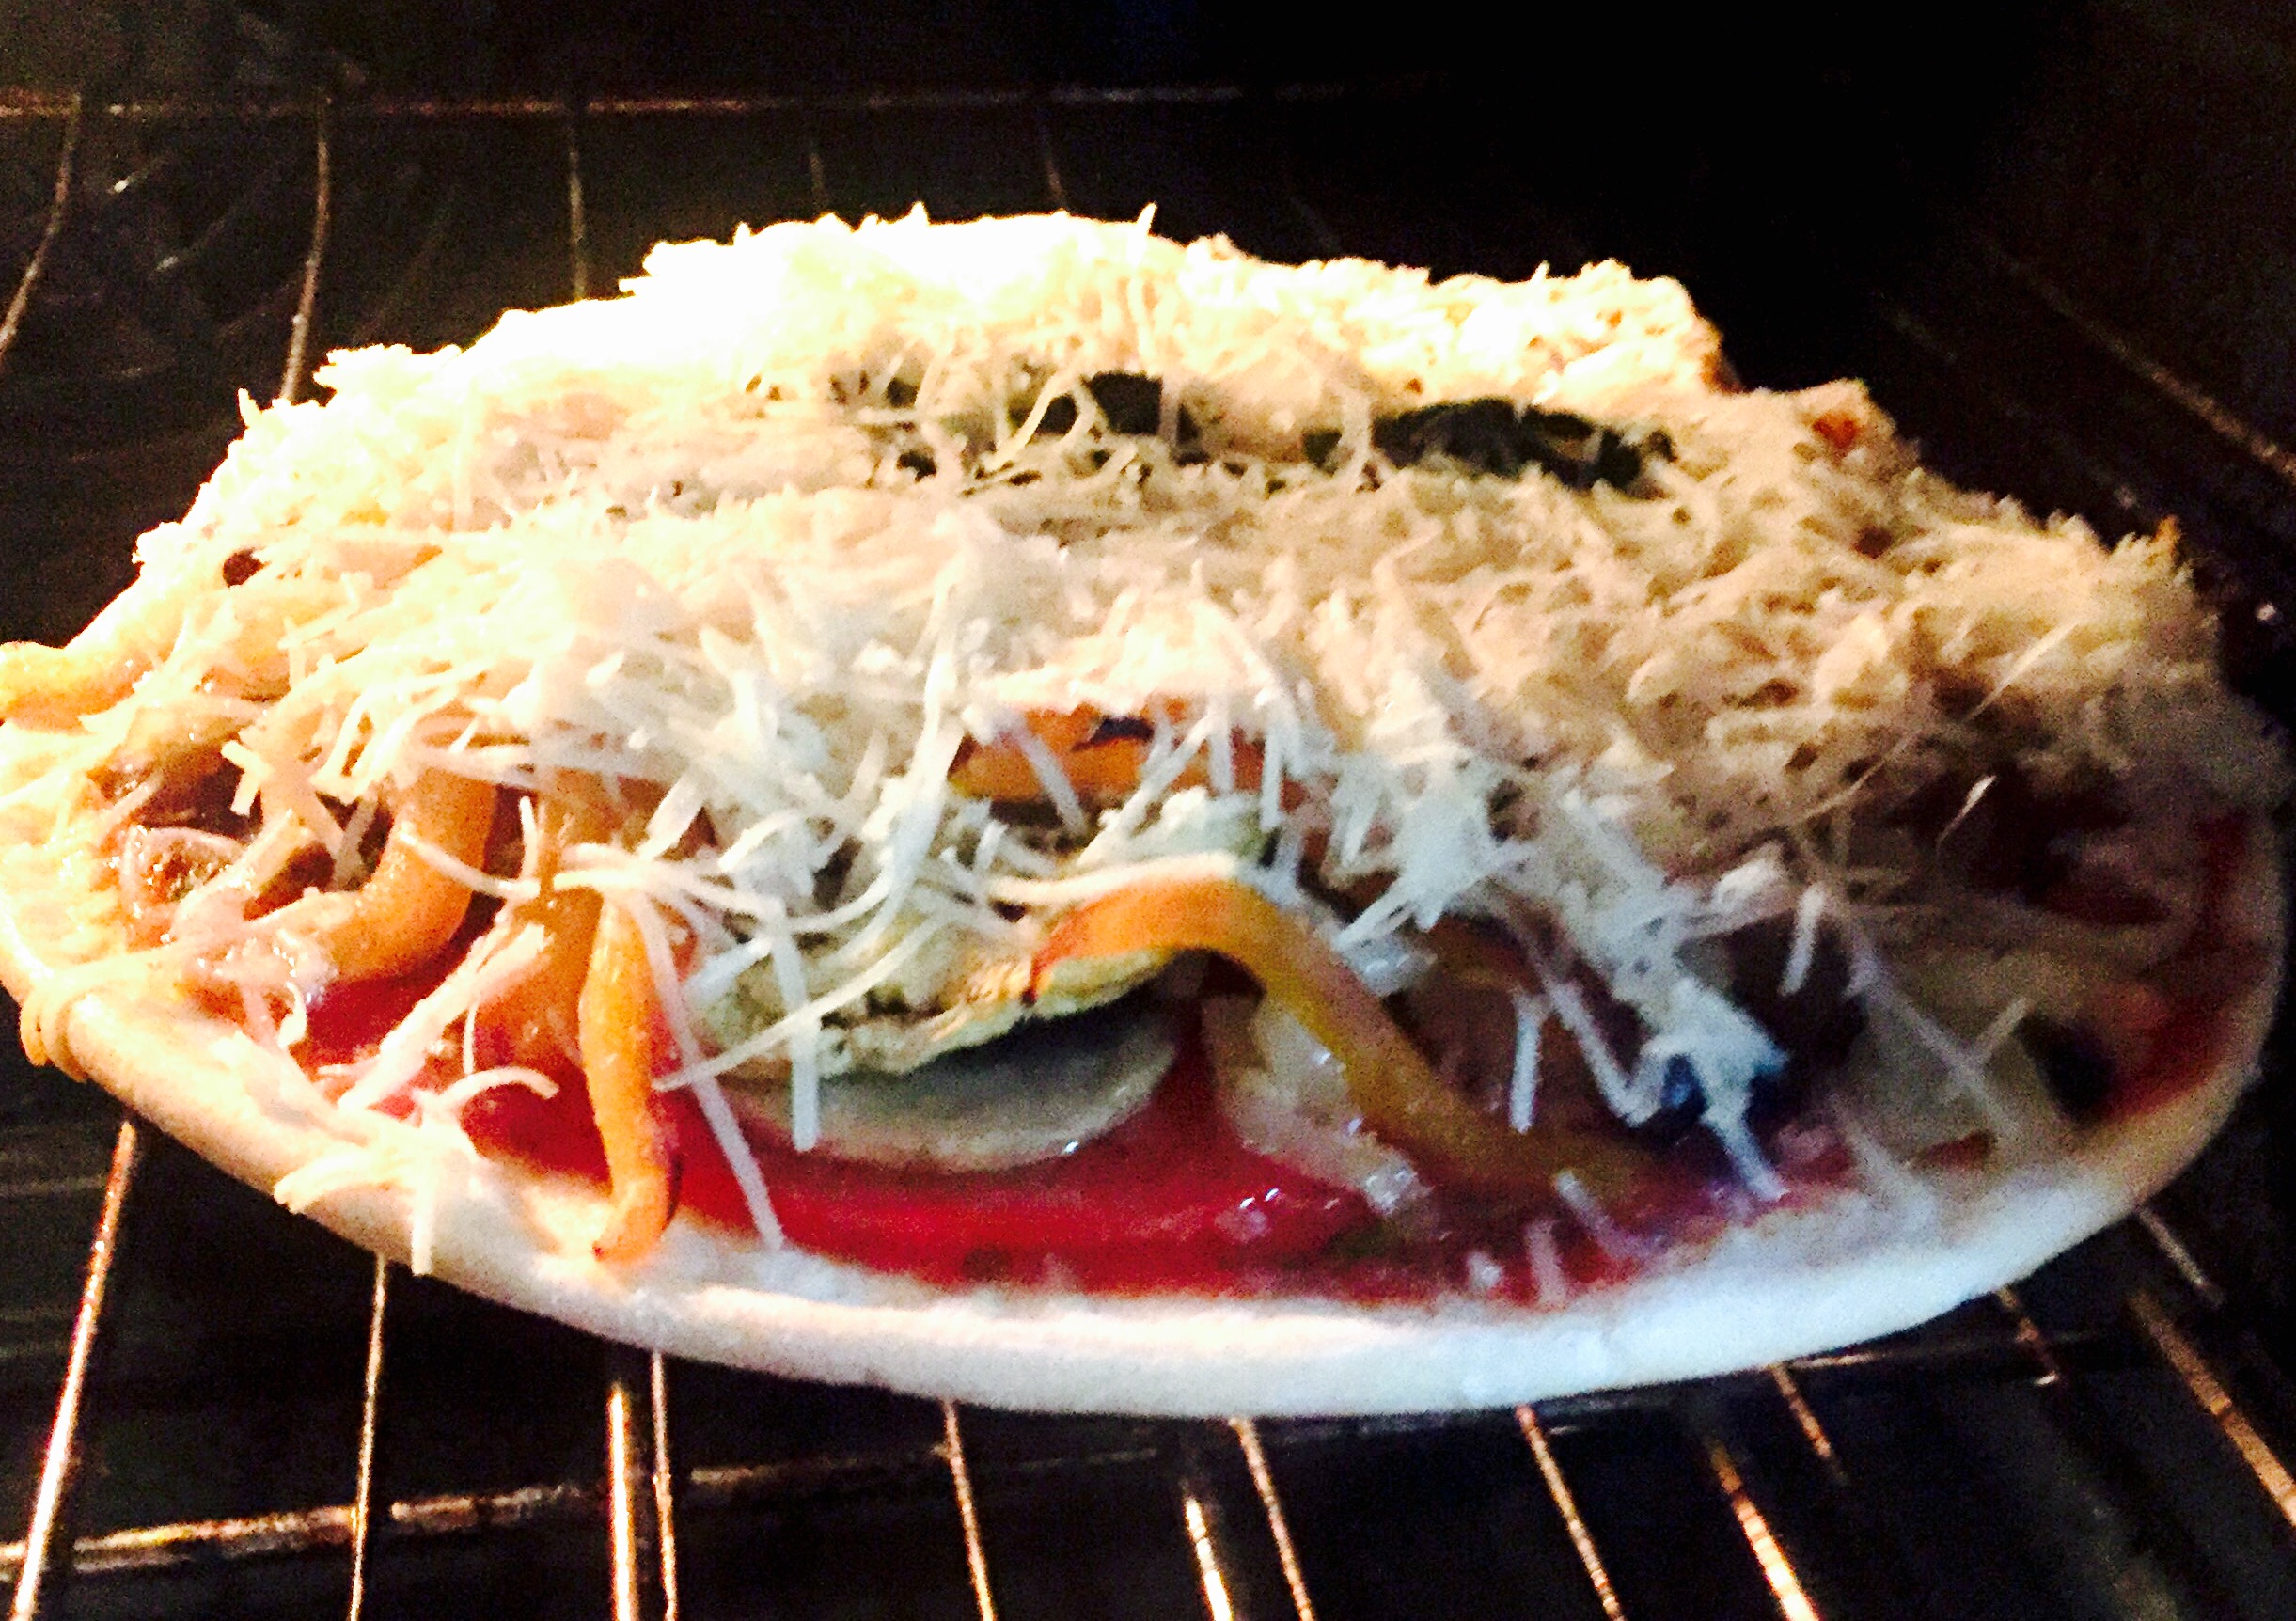 A delicious dairy free gluten free pizza loaded with toppings